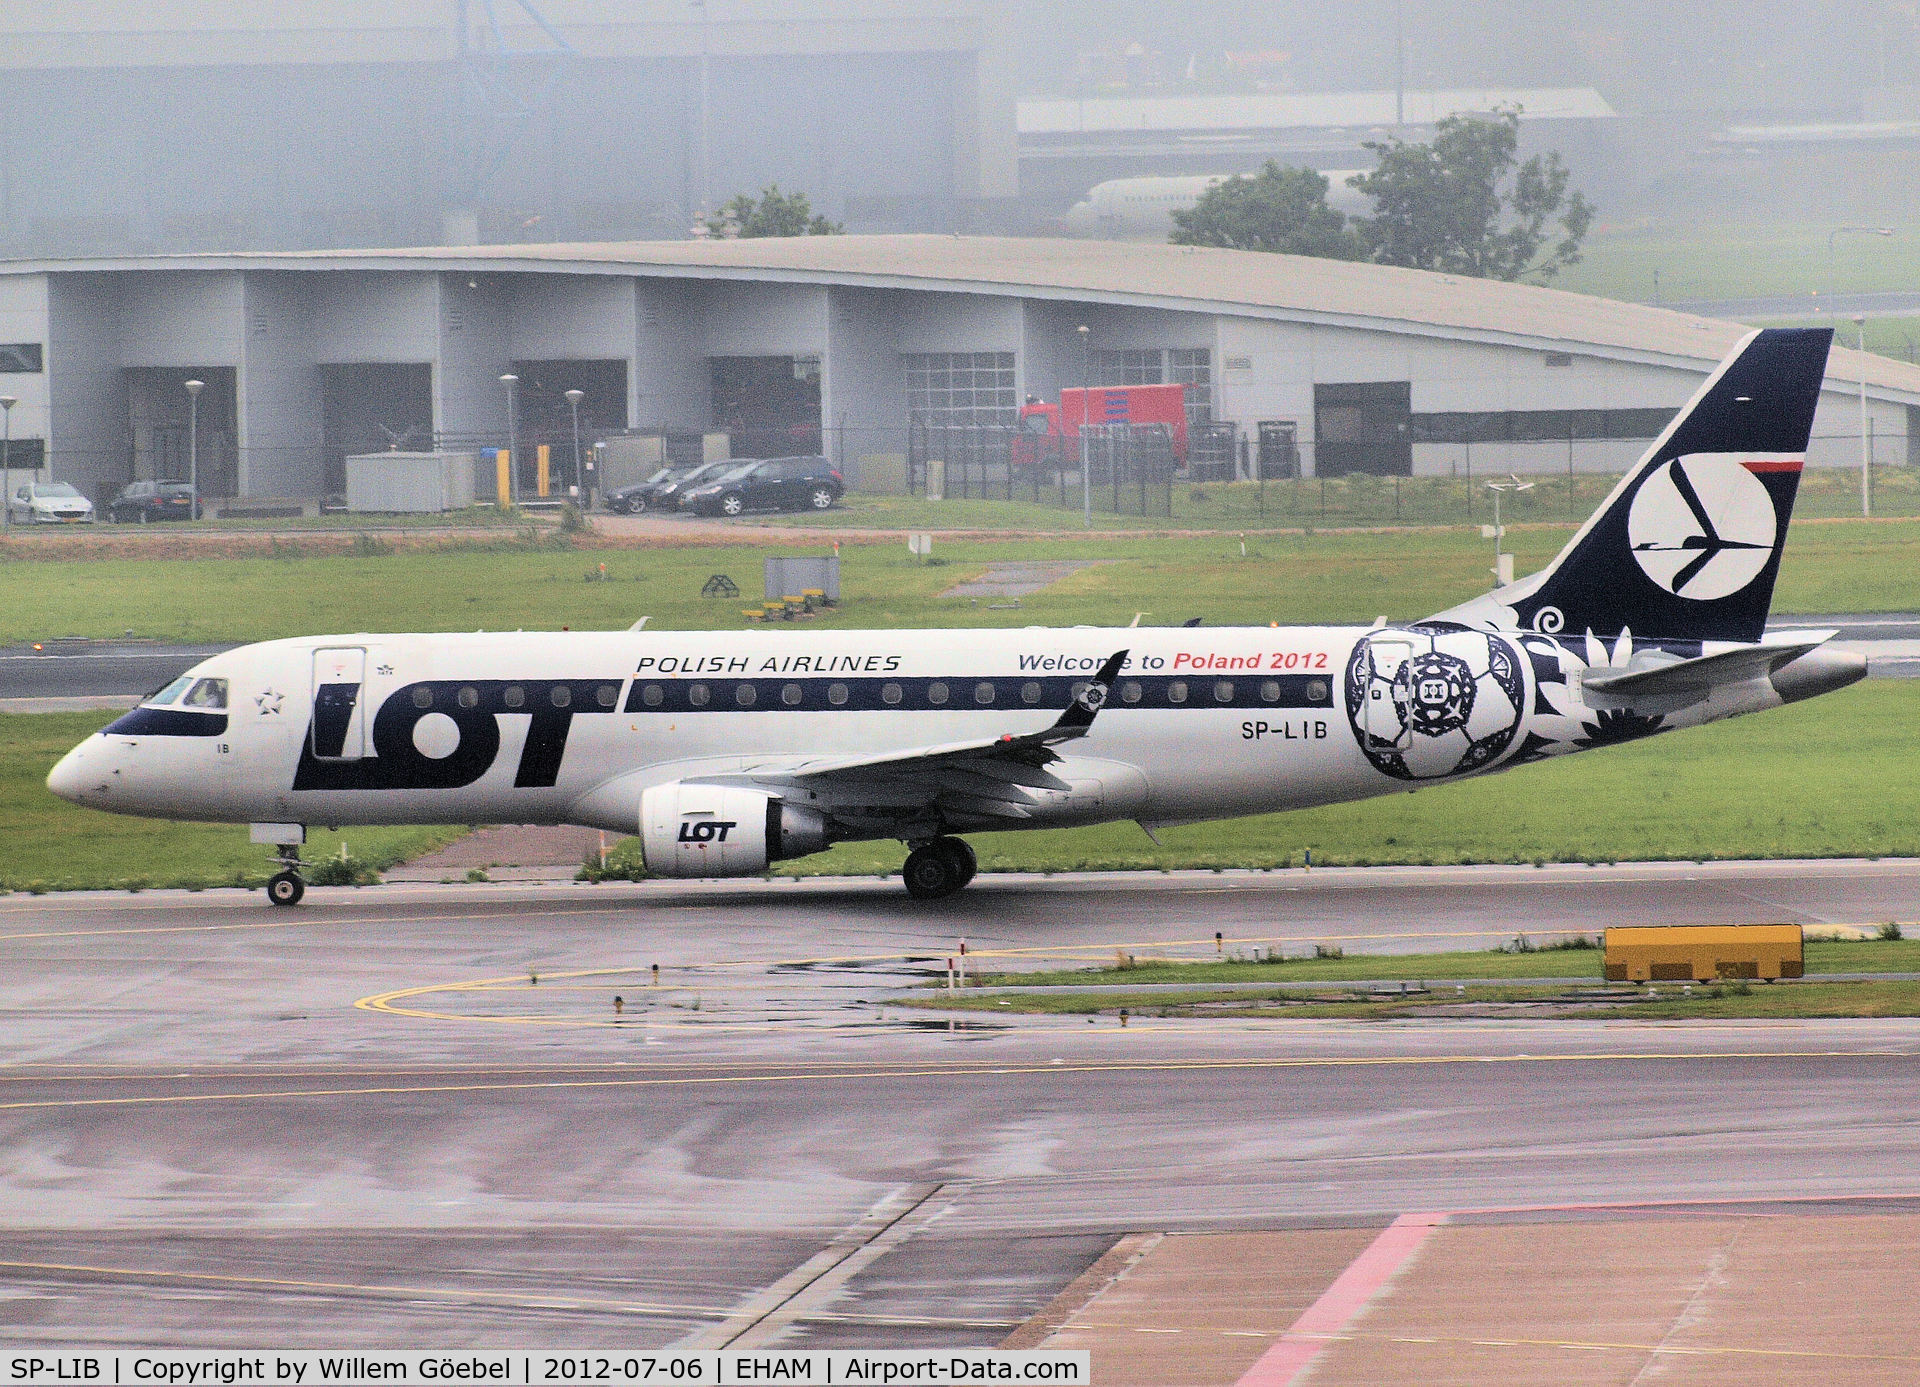 SP-LIB, 2006 Embraer 175STD (ERJ-170-200STD) C/N 17000132, Taxi to runway 24 of Schiphol Airport WITH THE EK STICKER